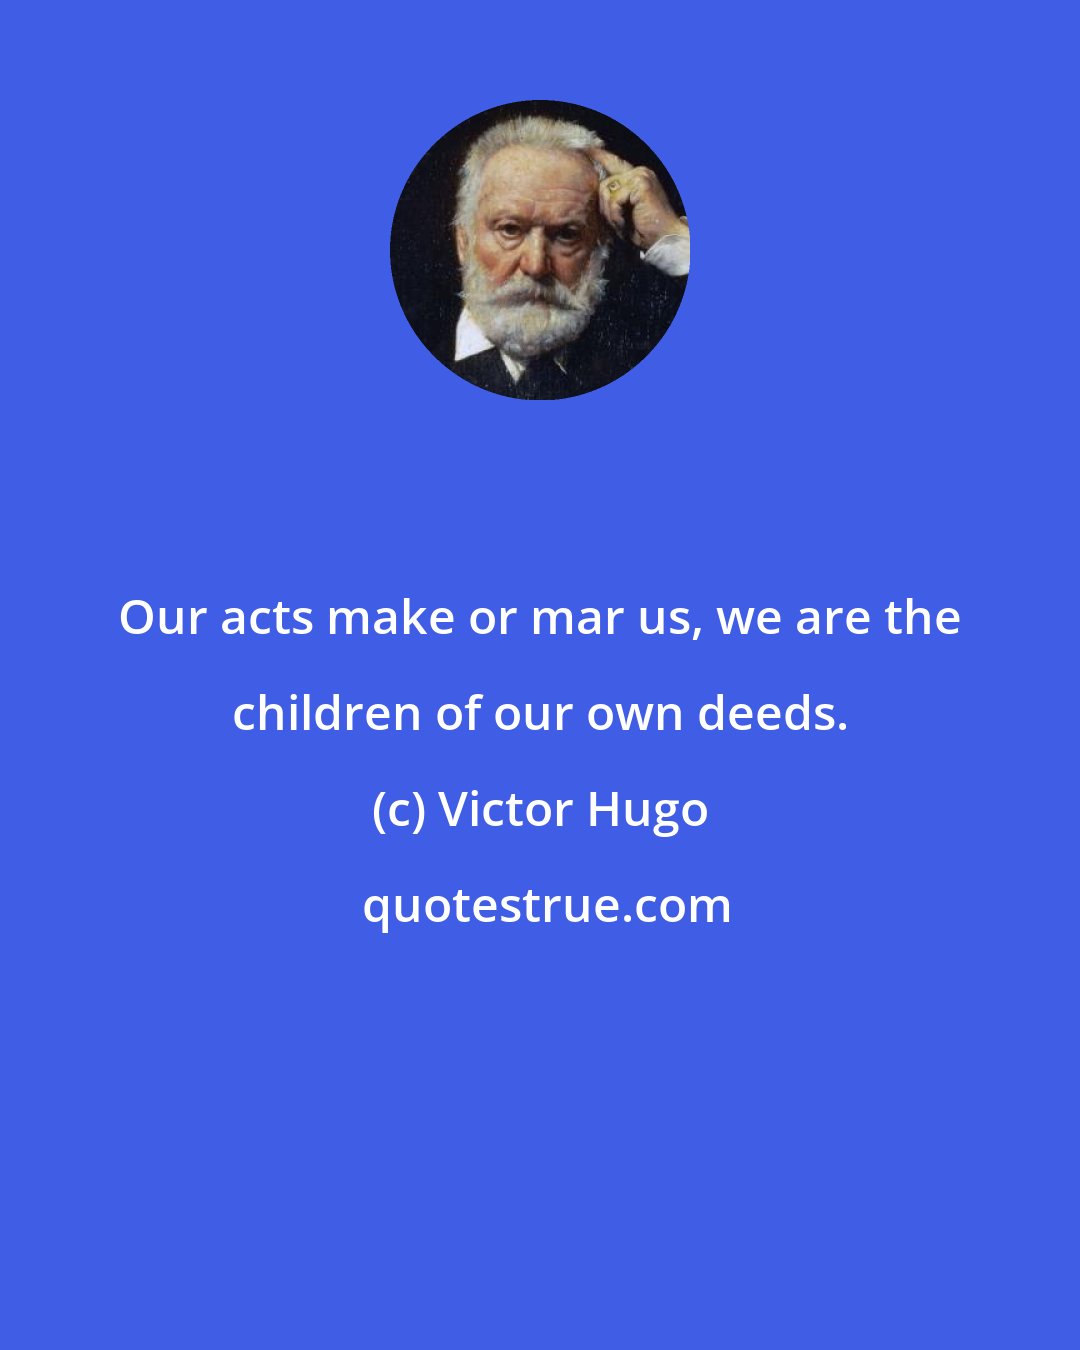 Victor Hugo: Our acts make or mar us, we are the children of our own deeds.